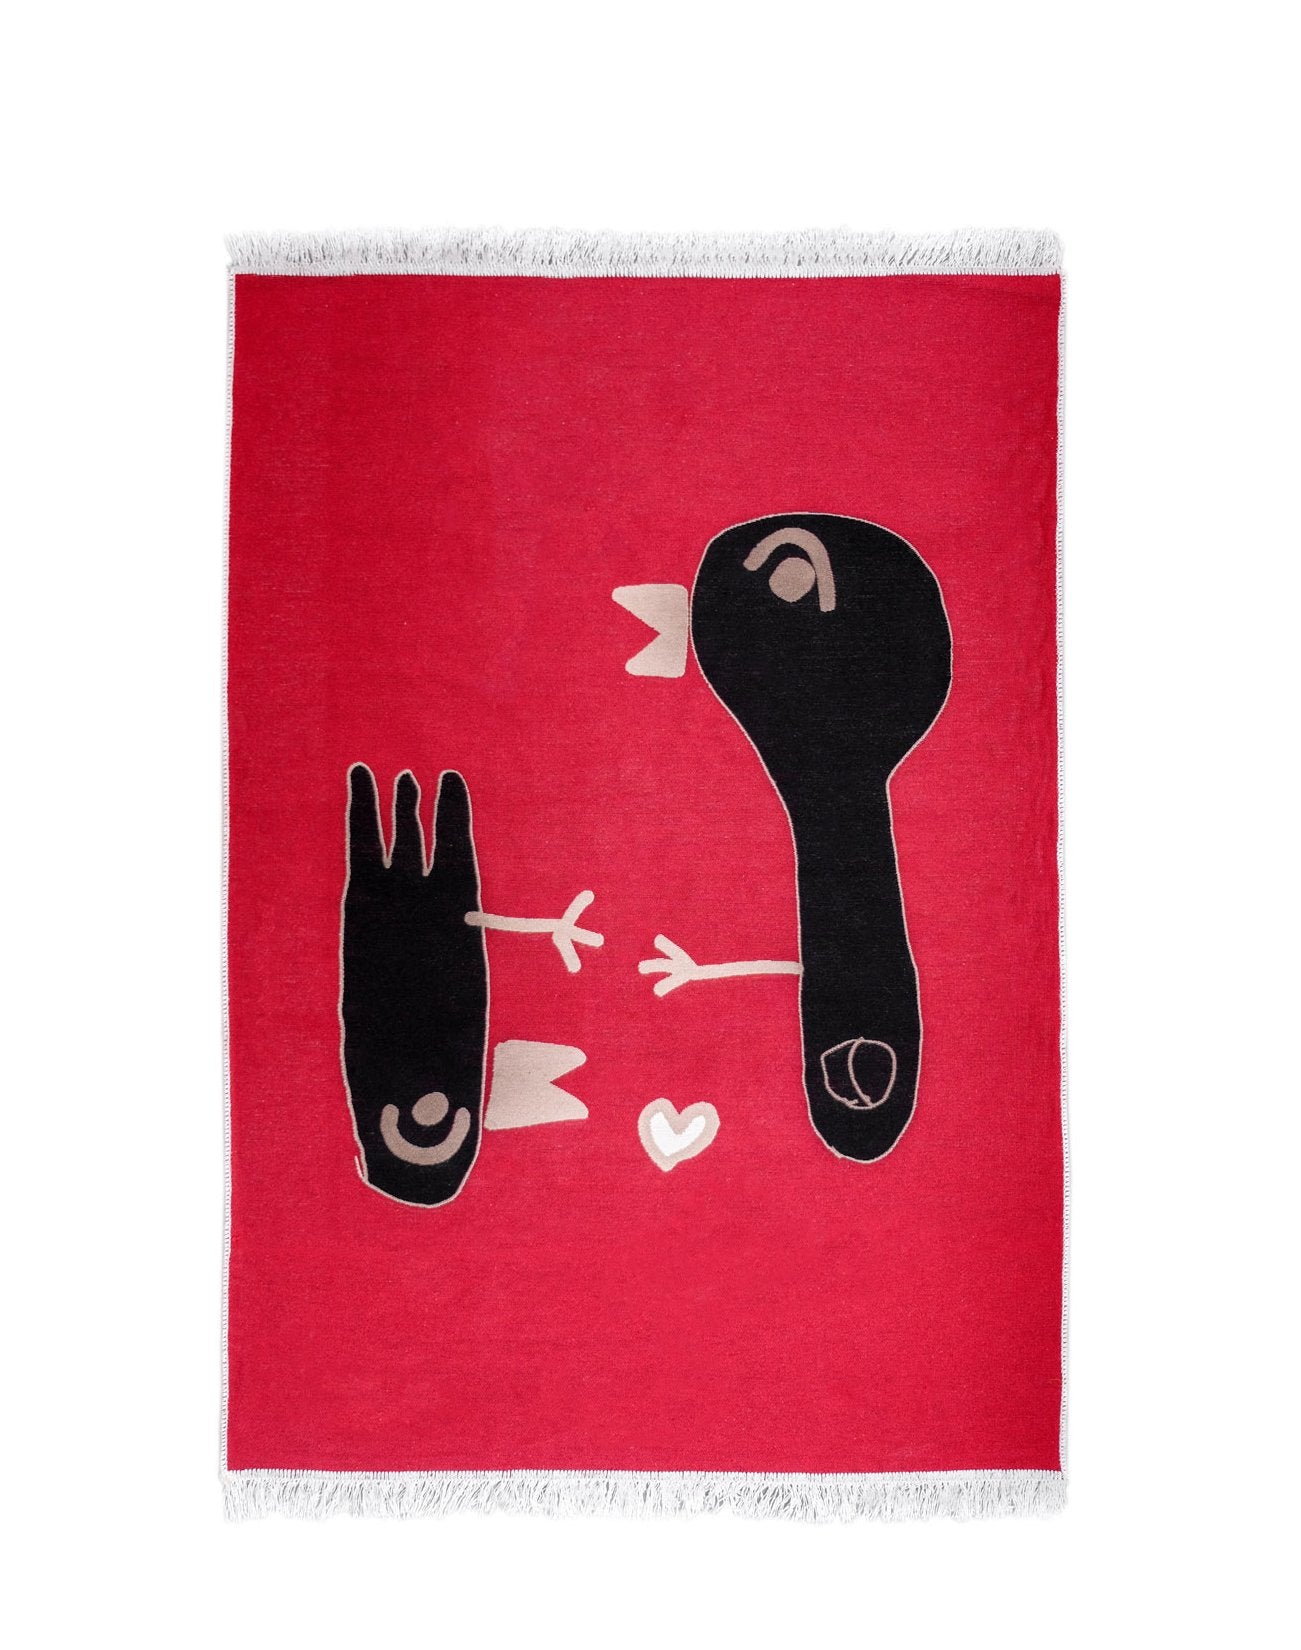 Vegan rug (Double-sided): "HOLD MY HAND", by Didem Çabukel TheKeep